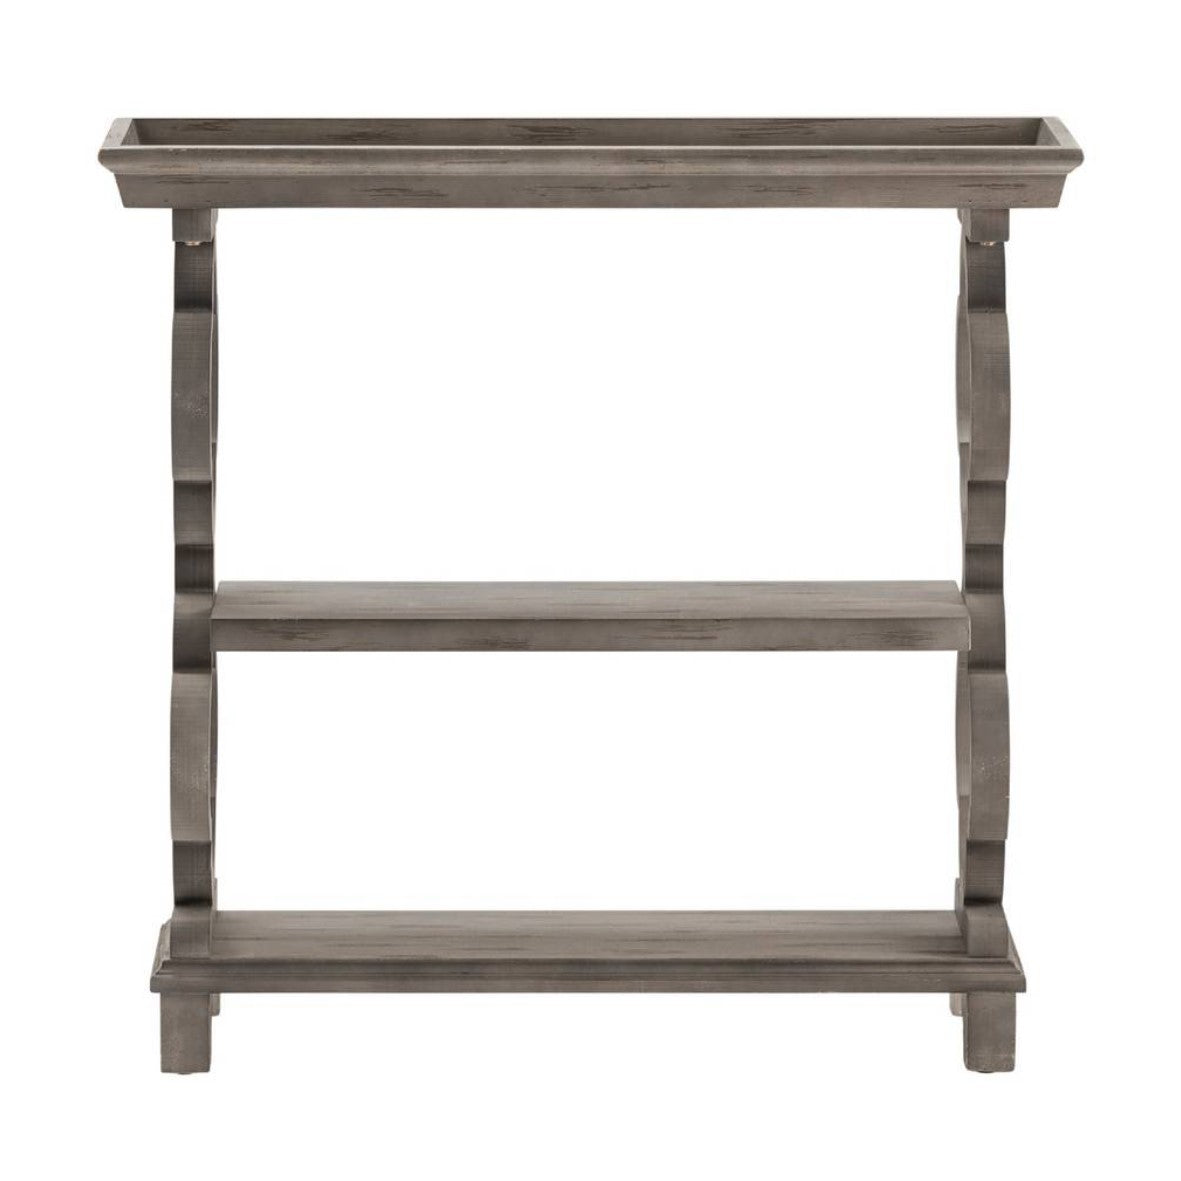 Crestview Collection Chelsea 36" x 14" x 35" Transitional Wood Tray Top Quatrefoil Console Table In Distressed Gray Finish